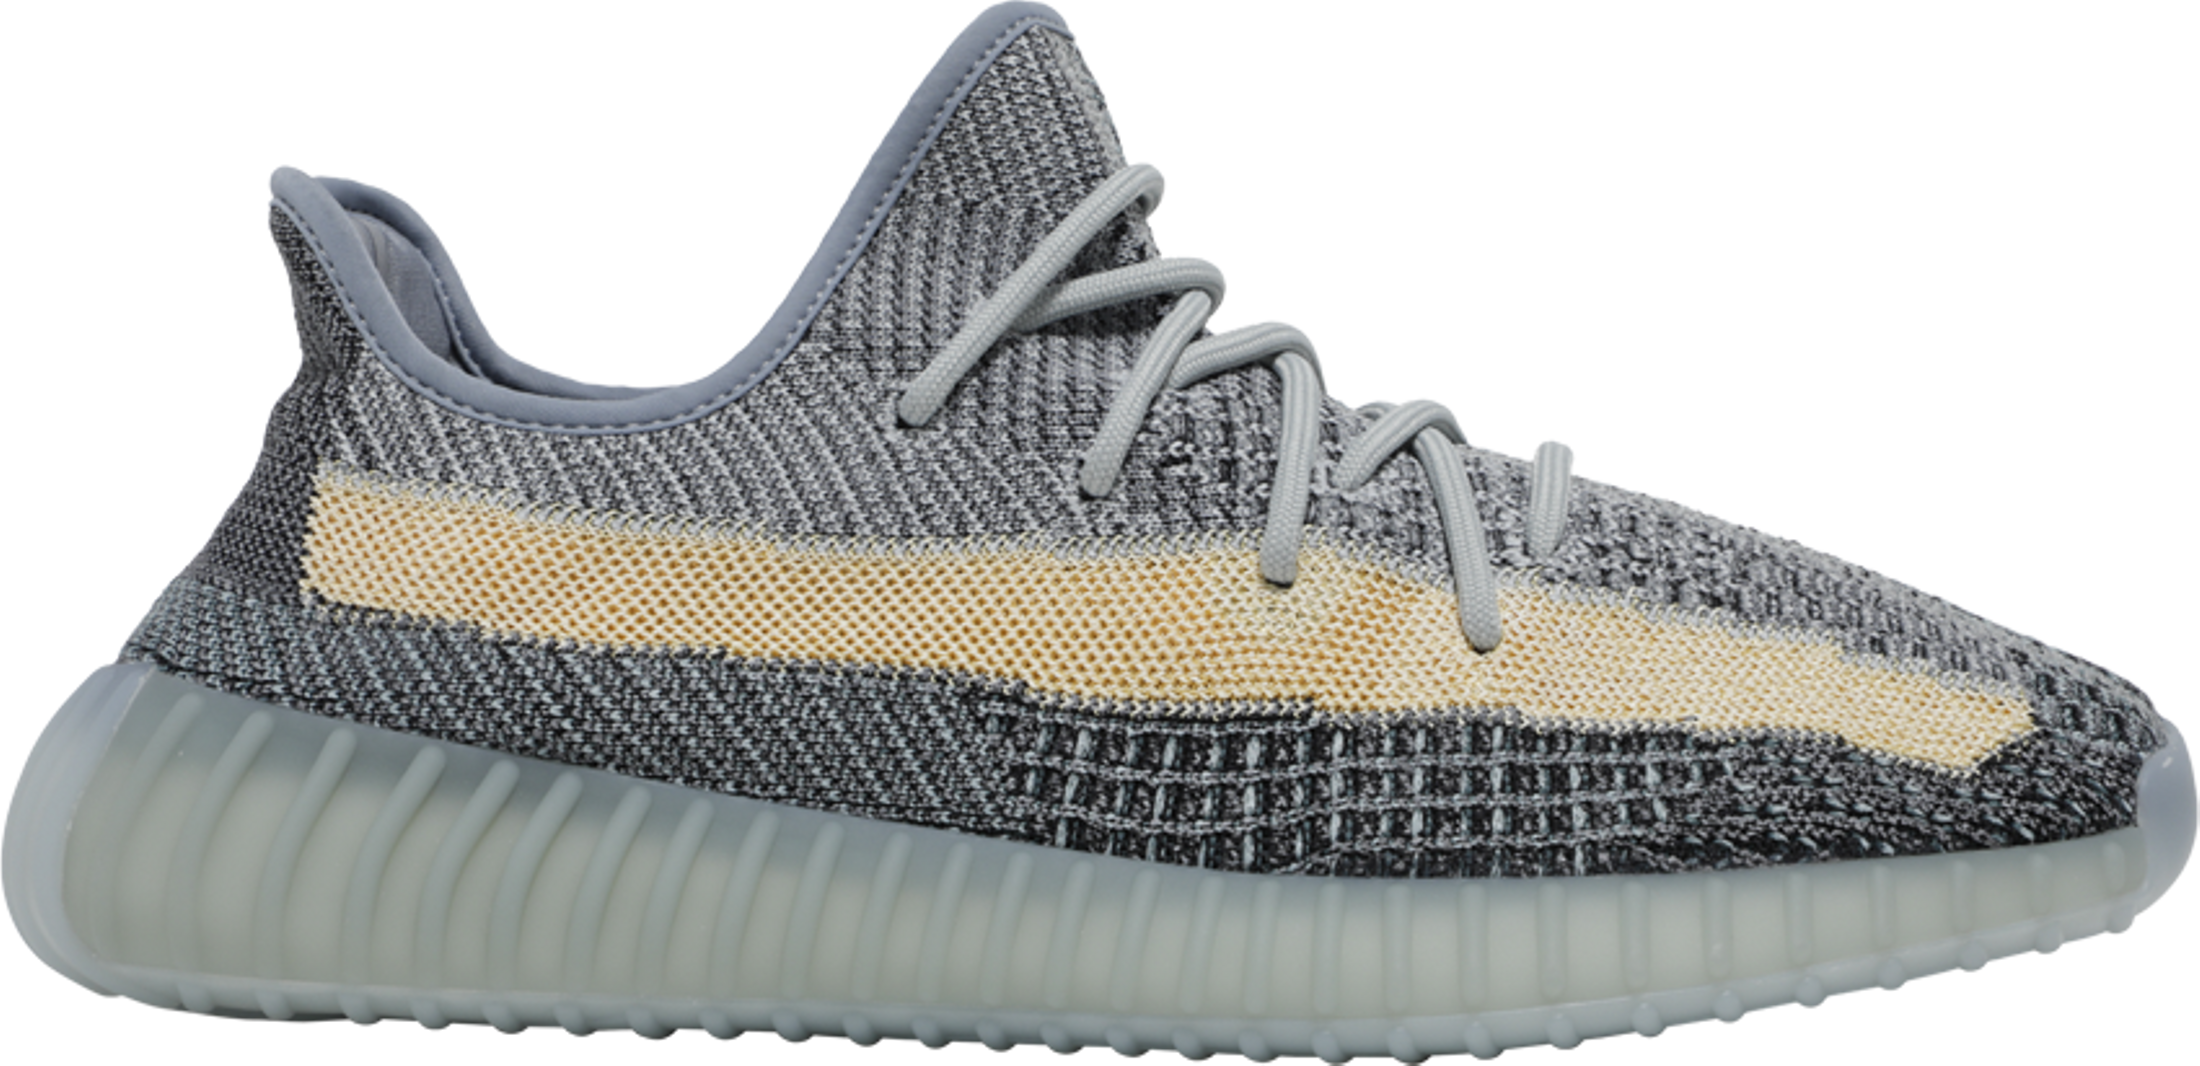 Buy Adidas Yeezy Boost 350 V2 - By1604 - Size 9.5 at